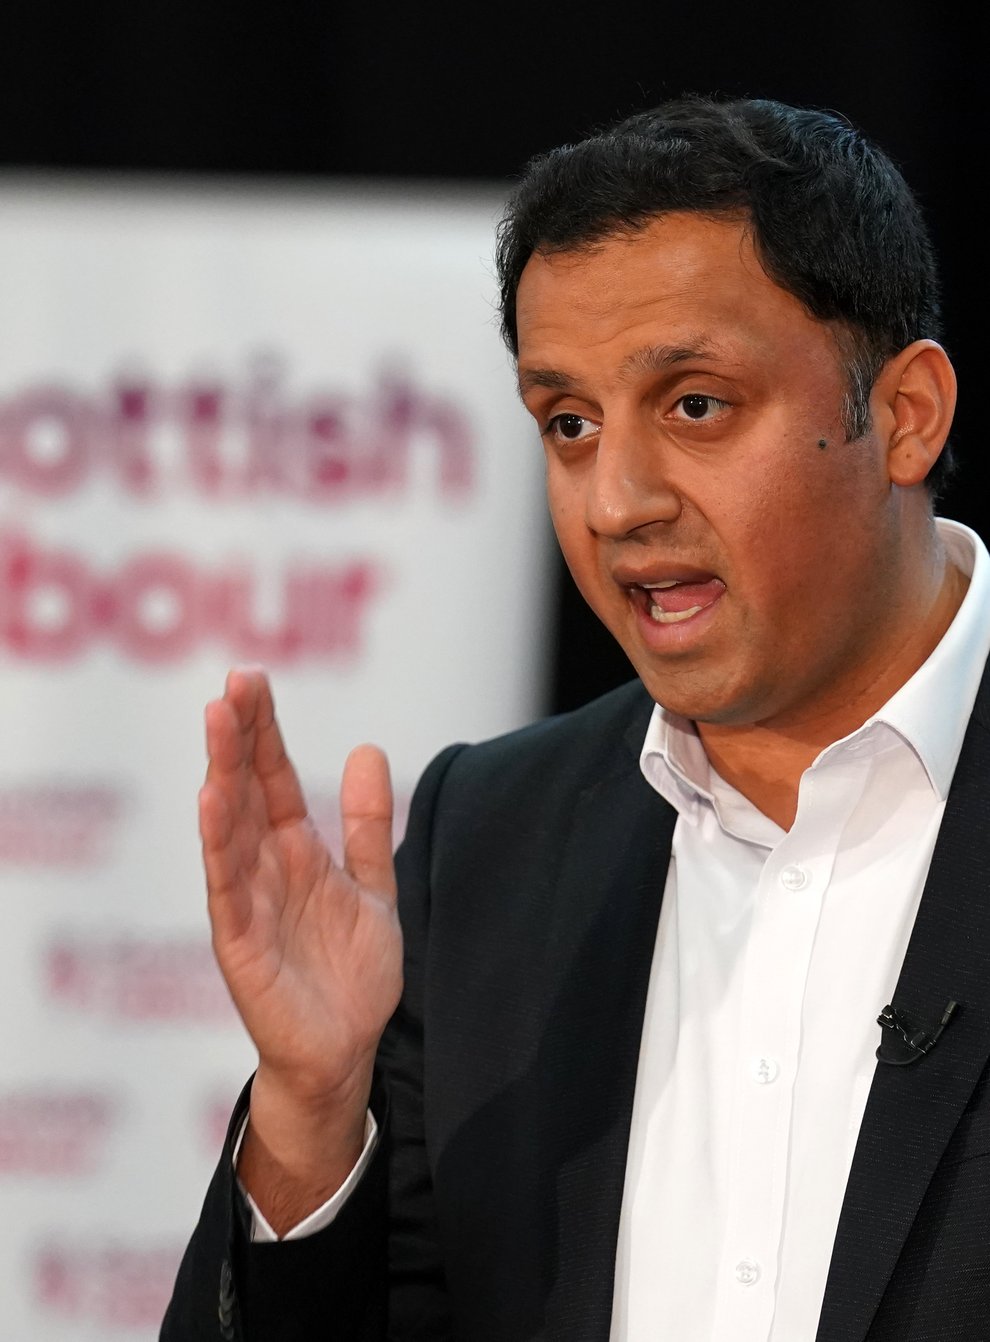 Scottish Labour leader Anas Sarwar said there is “nothing” the SNP can say that won’t amplify how he feels about Boris Johnson (PA)